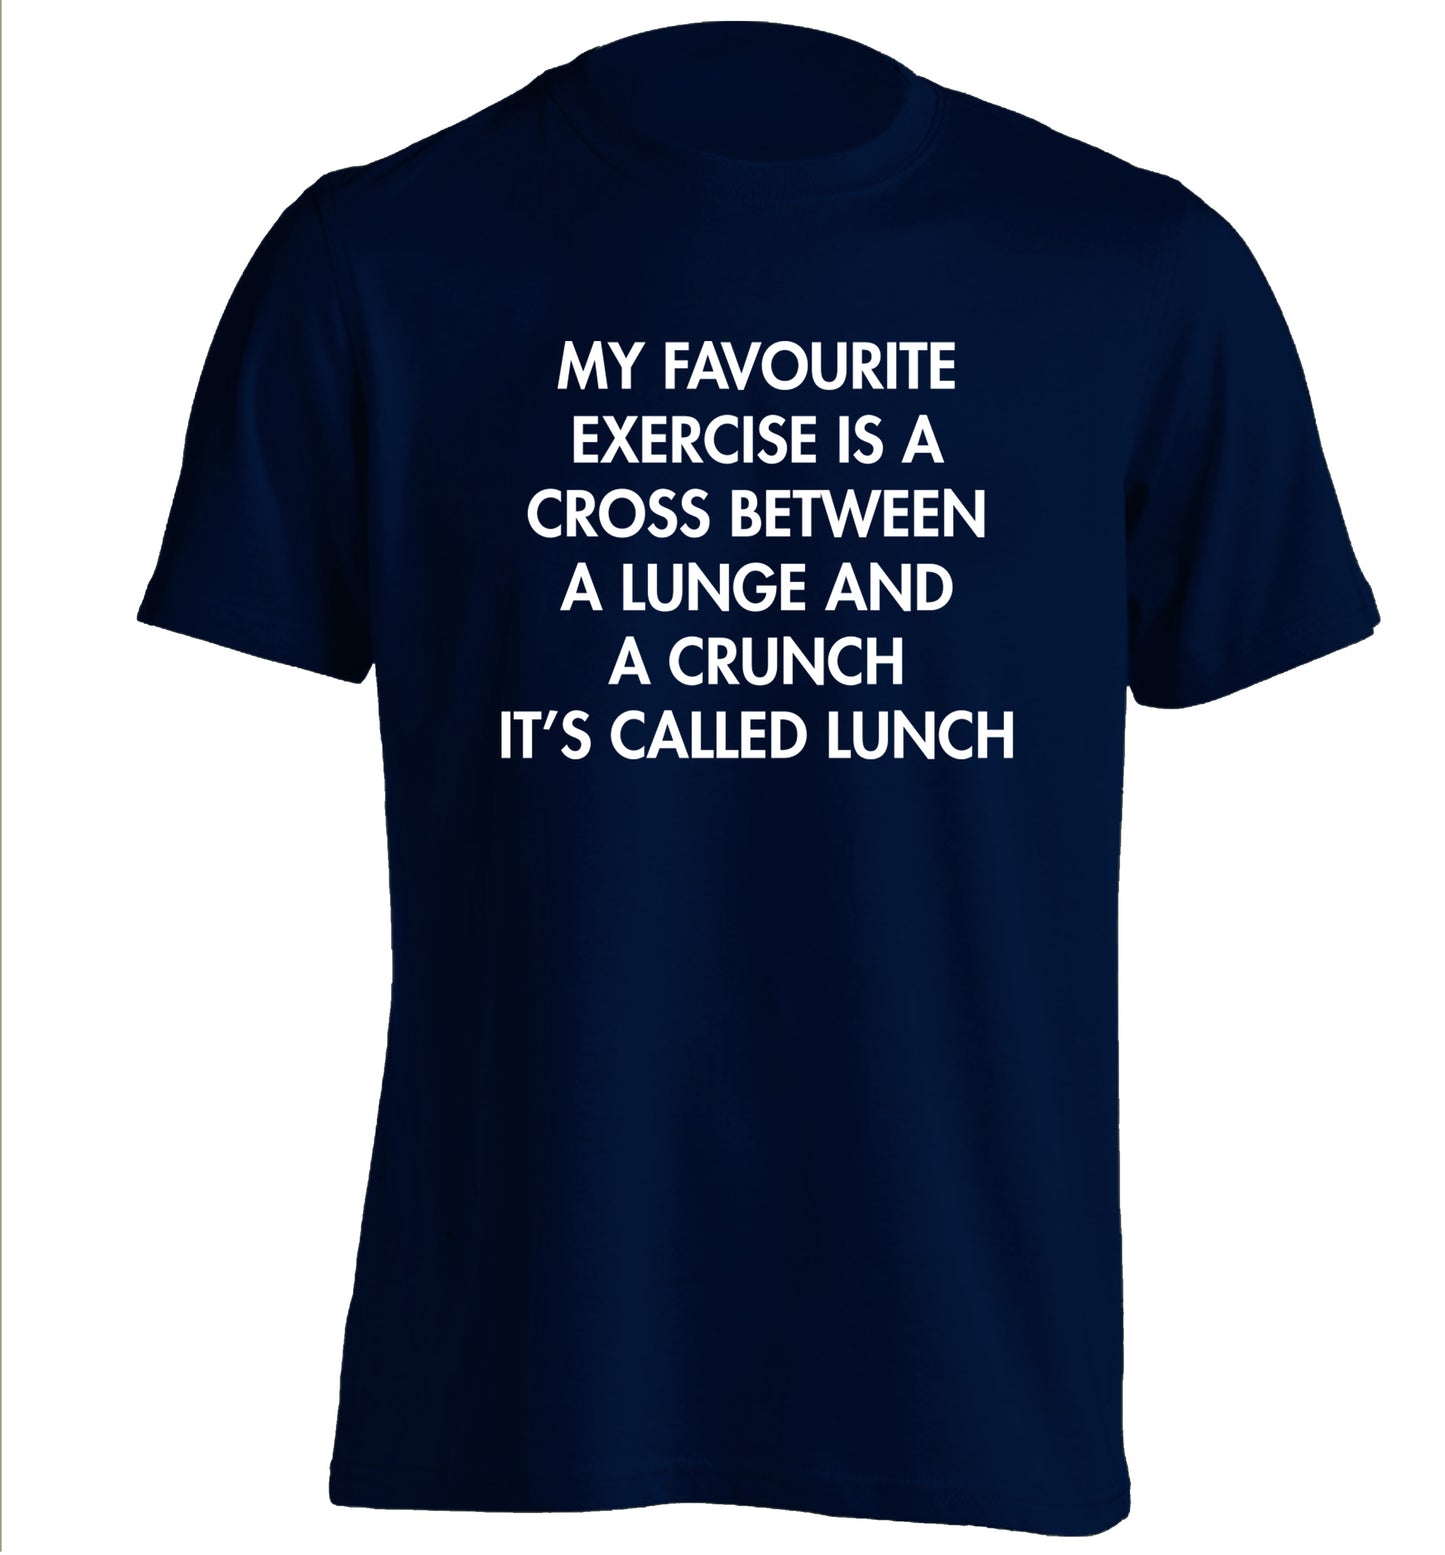 My favourite exercise is a cross between a lung and a crunch it's called lunch adults unisex navy Tshirt 2XL